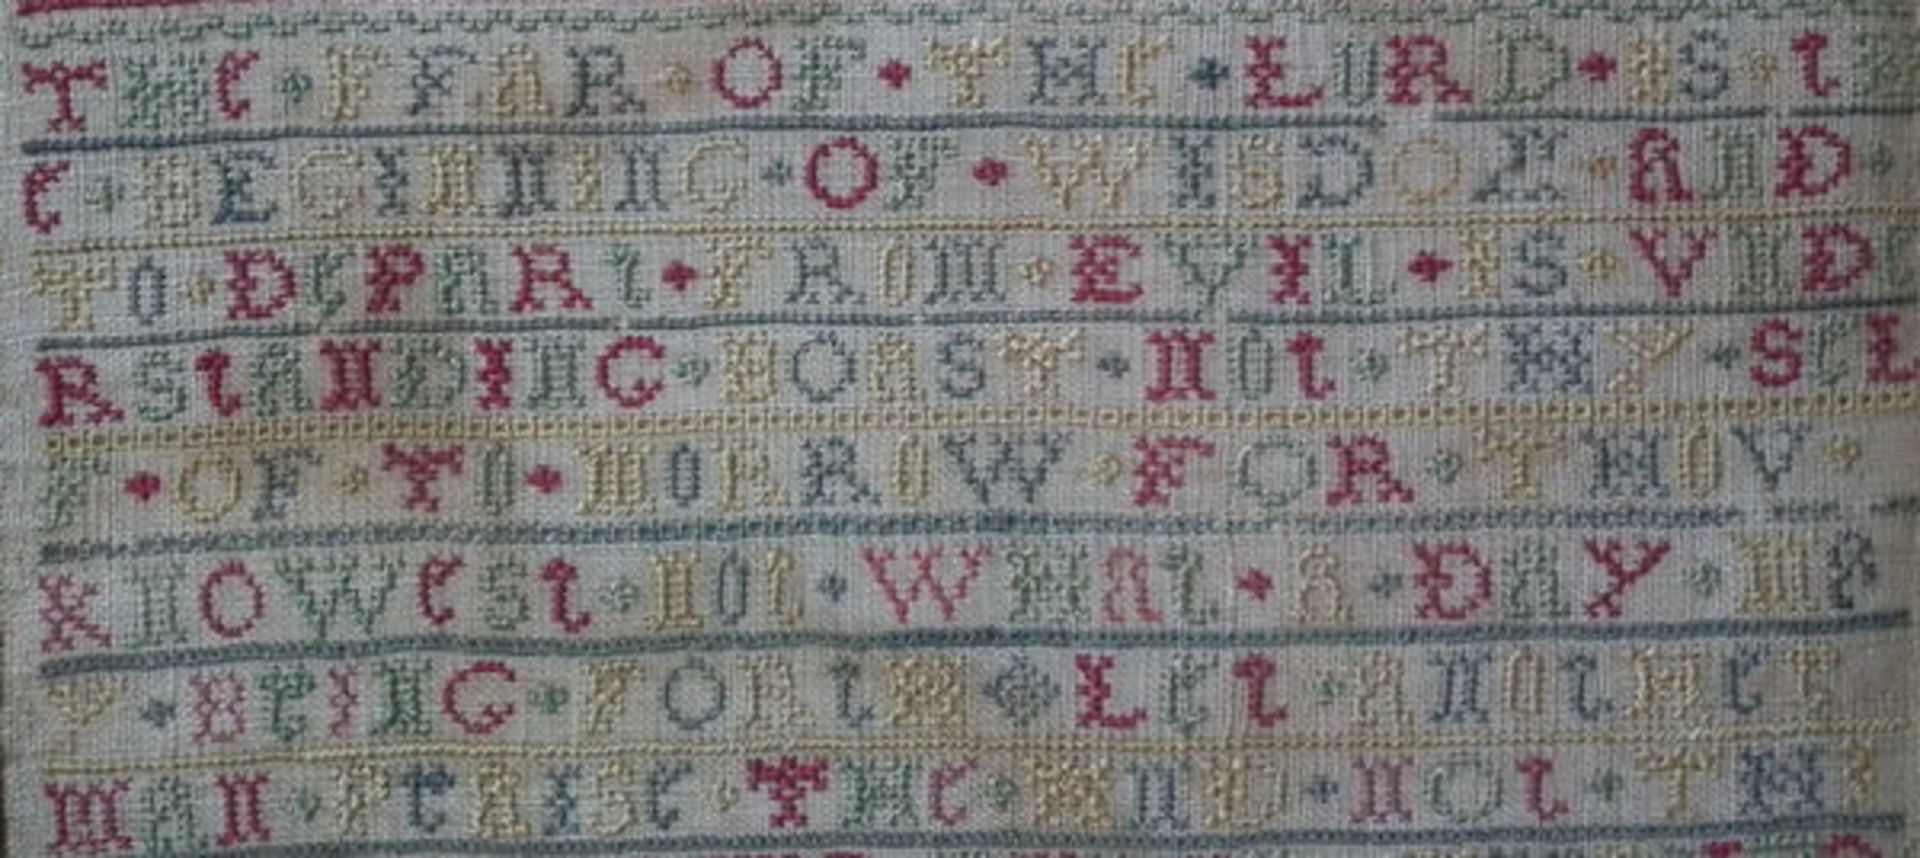 Needlework Band Sampler dated 1724 by Ann Wooding - FREE UK DELIVERY - Image 5 of 20